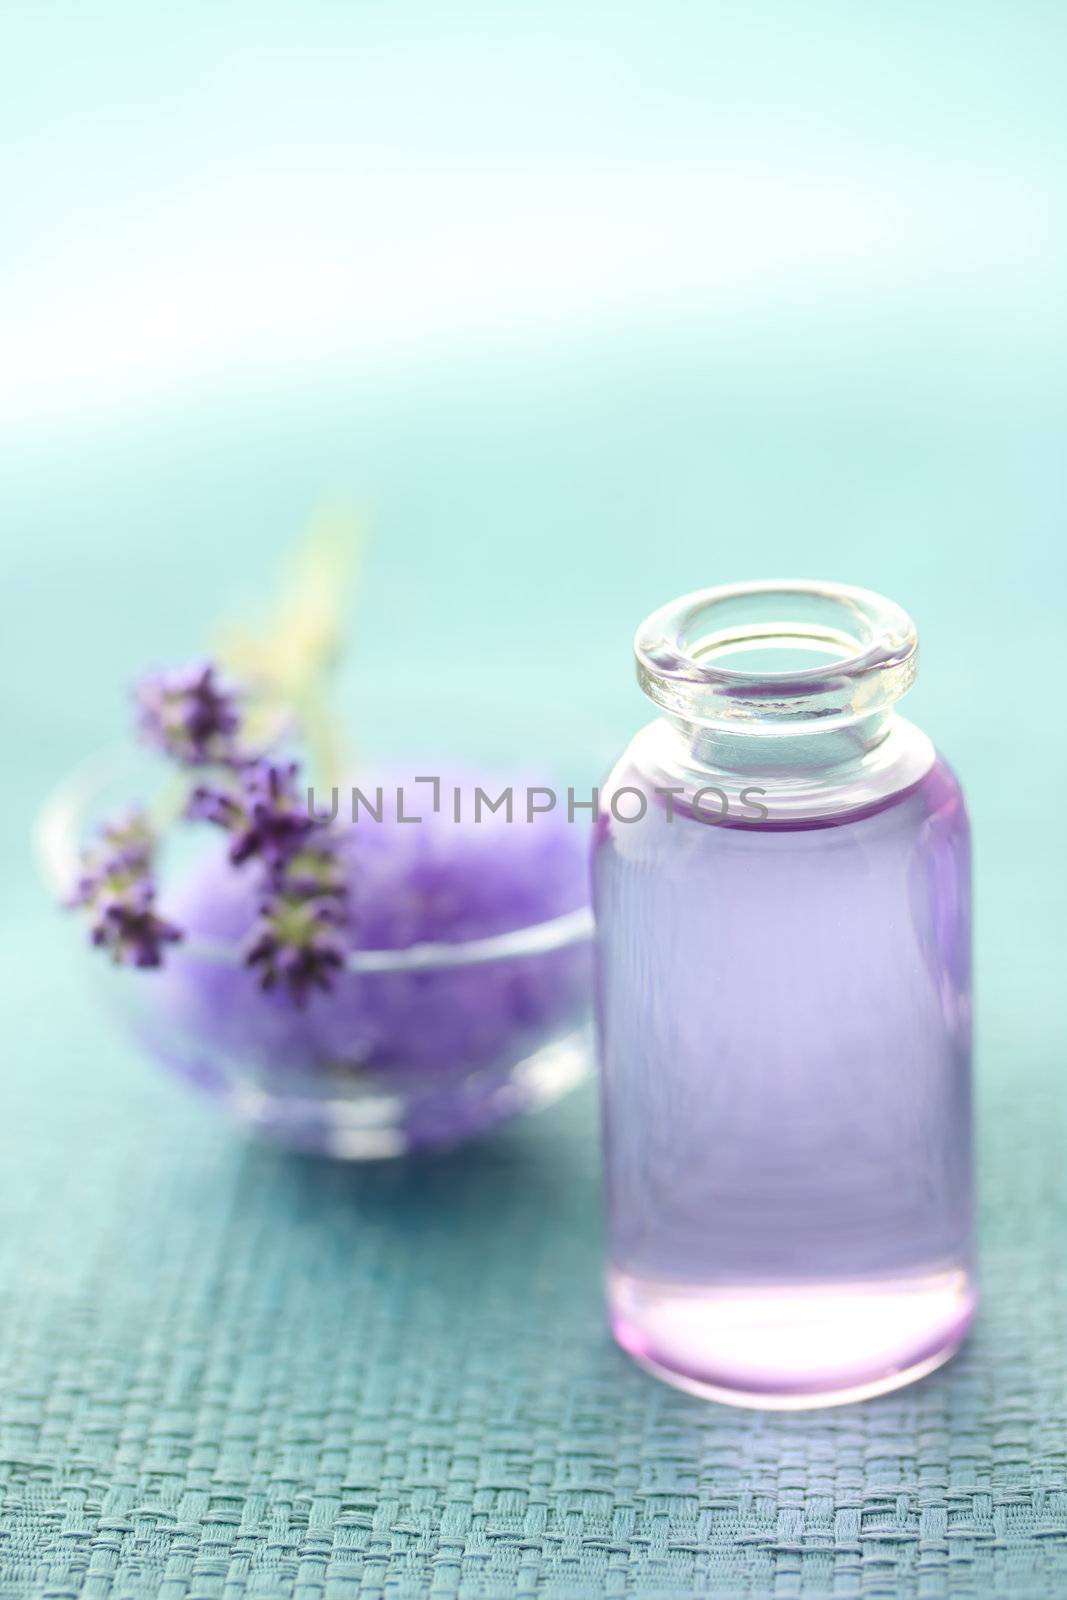 Aromatherapy oil and lavender with bath salt over blue background